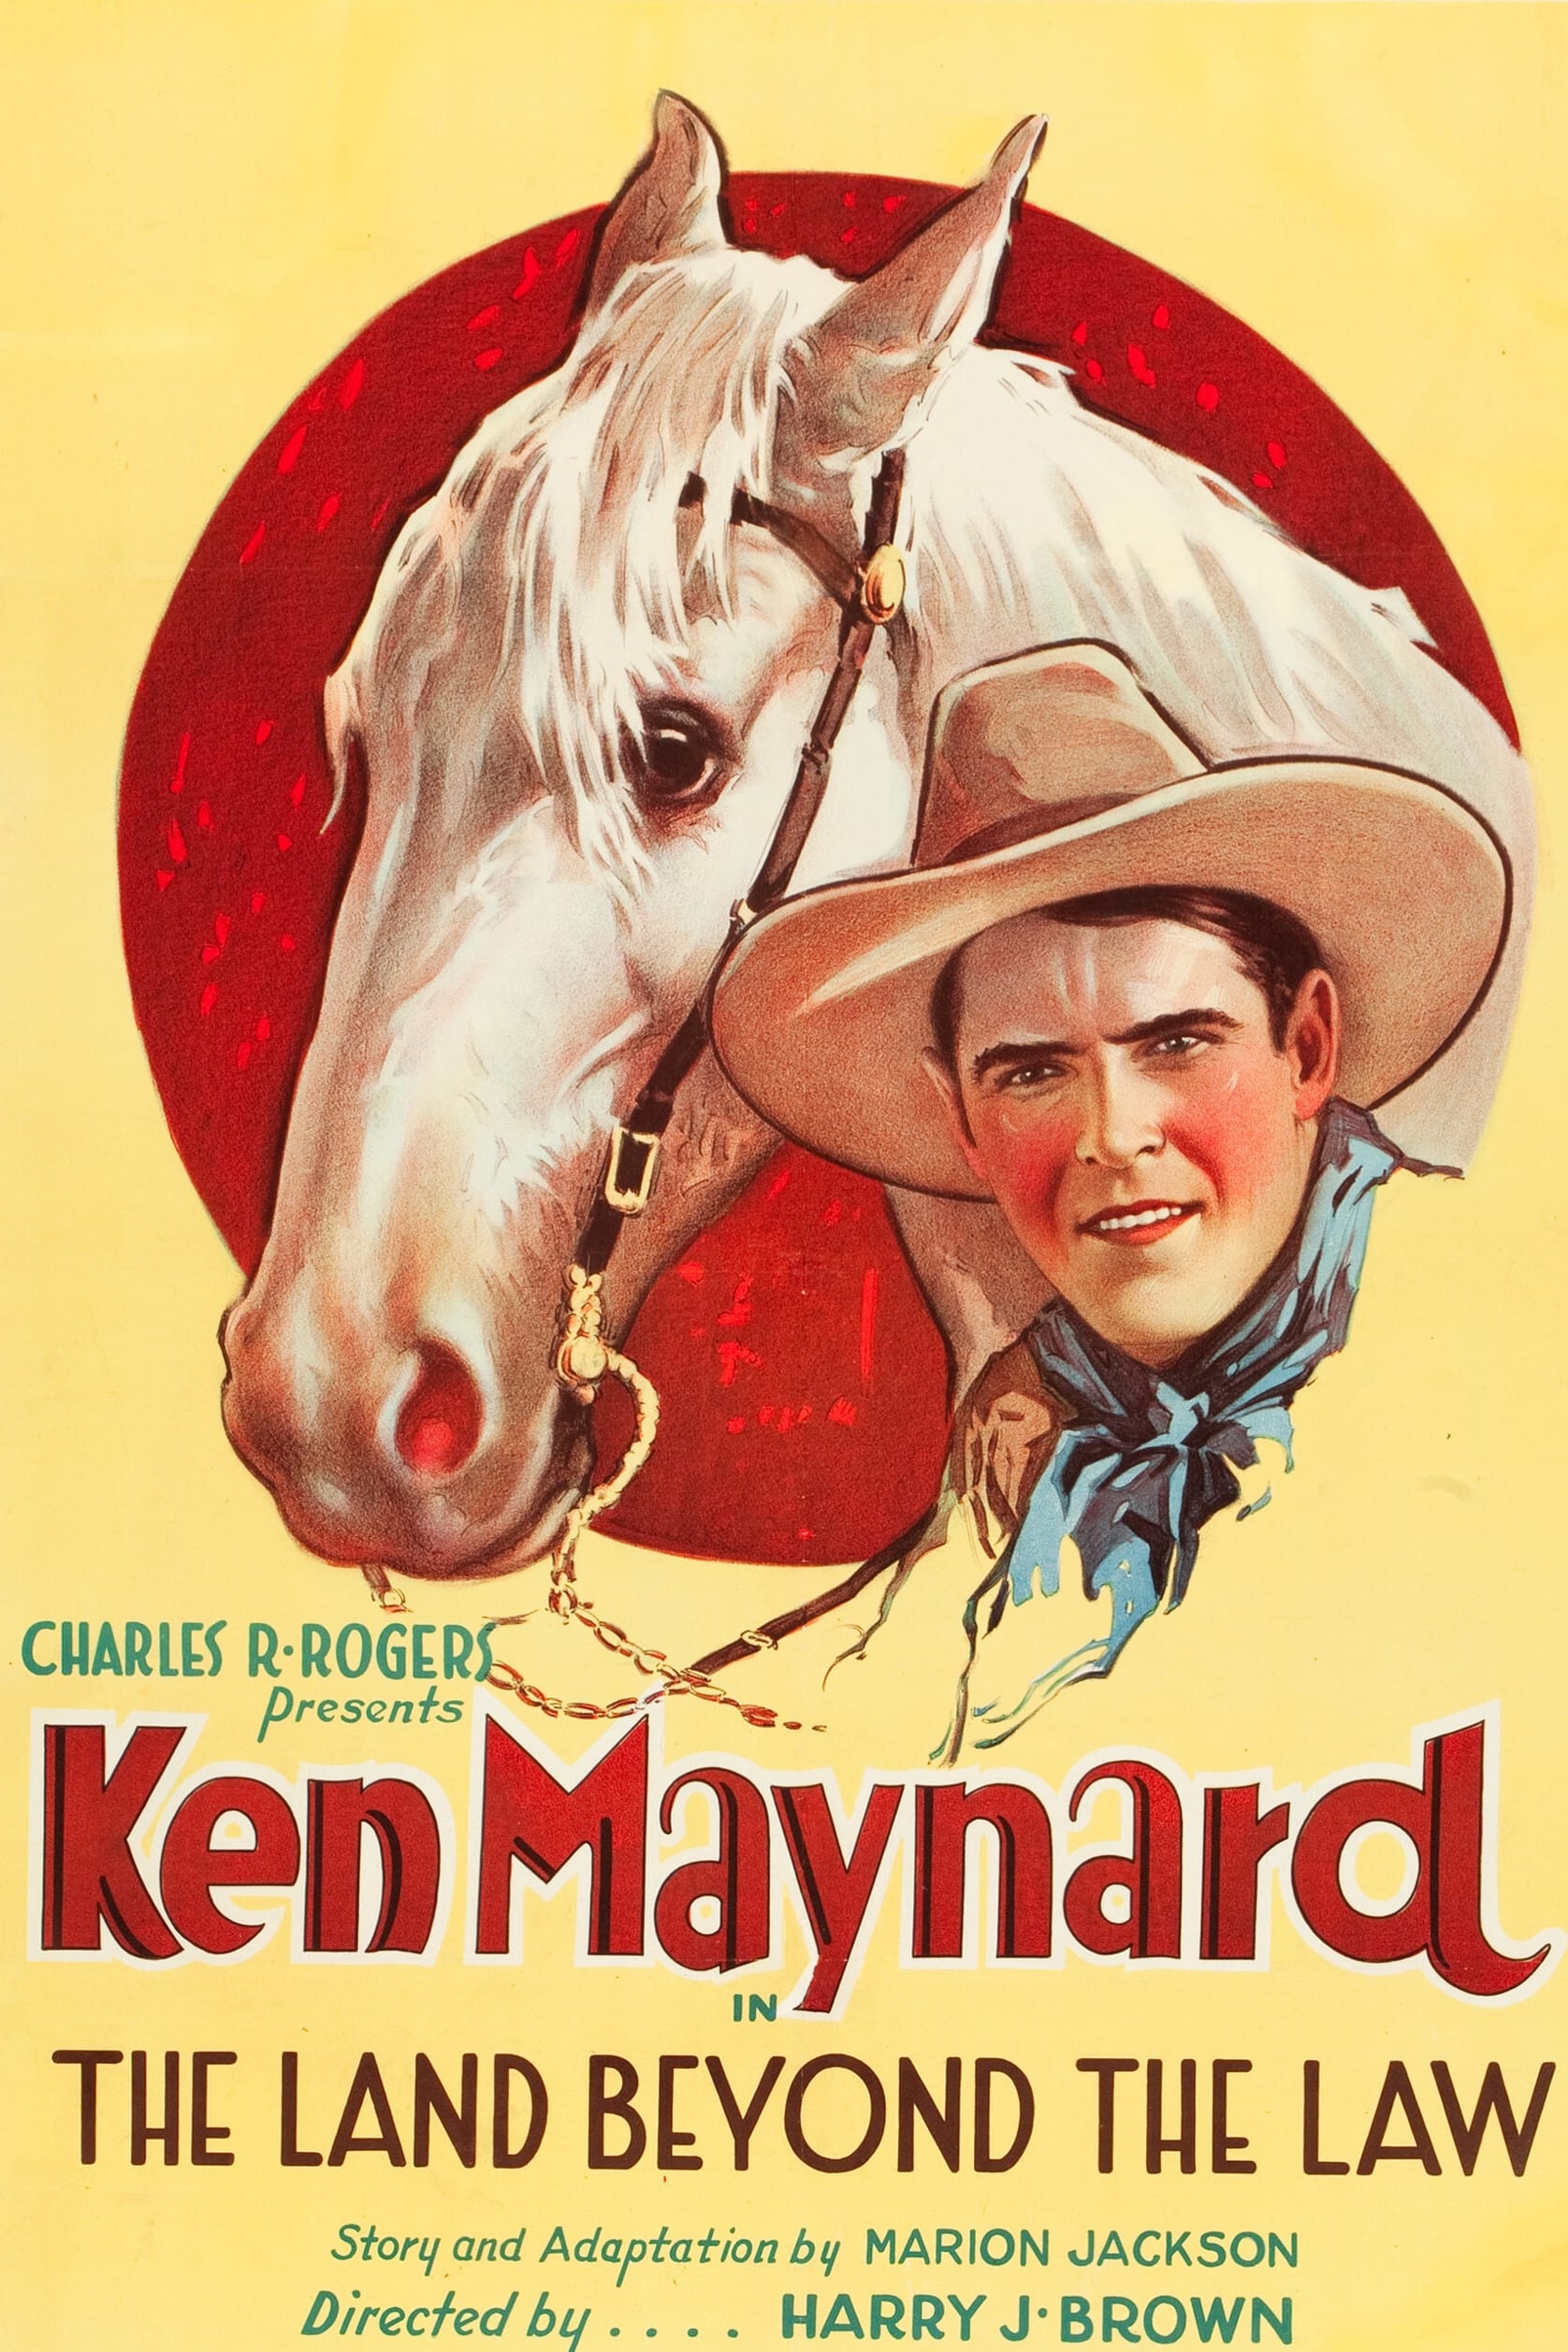 The Land Beyond the Law (1927)